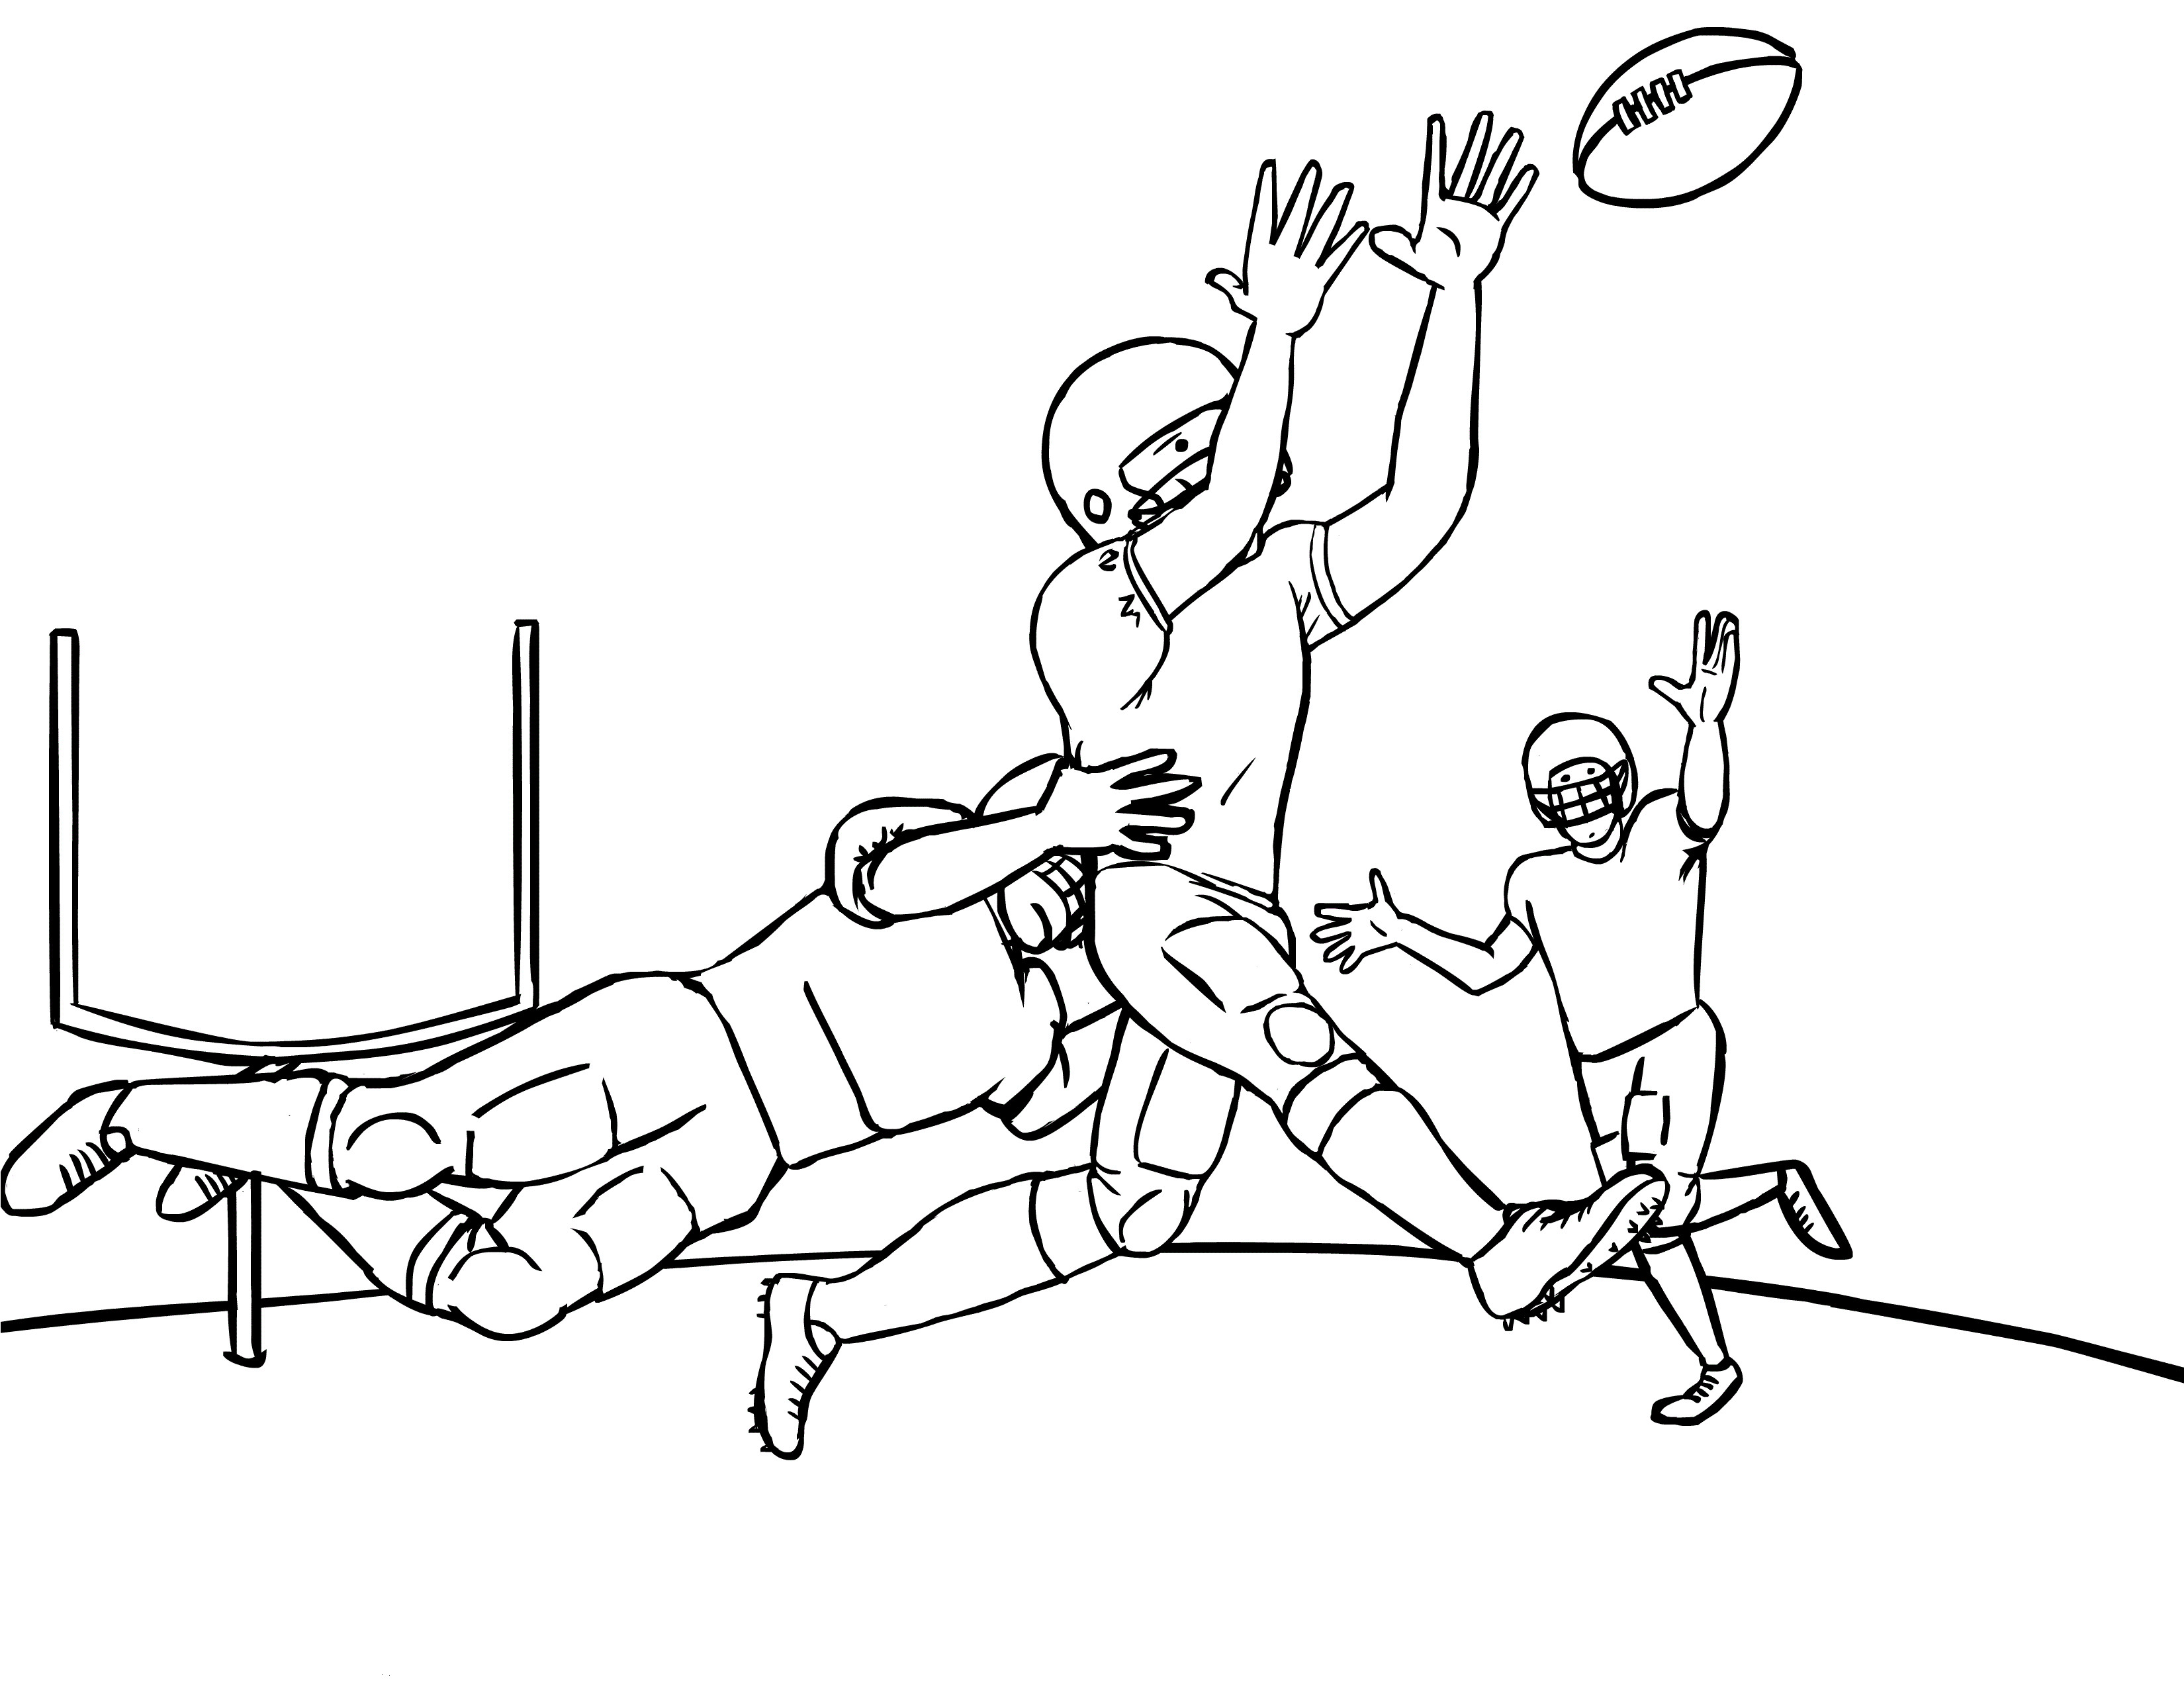 Coloring Pages For Boys Football Players
 Free Printable Football Coloring Pages for Kids Best